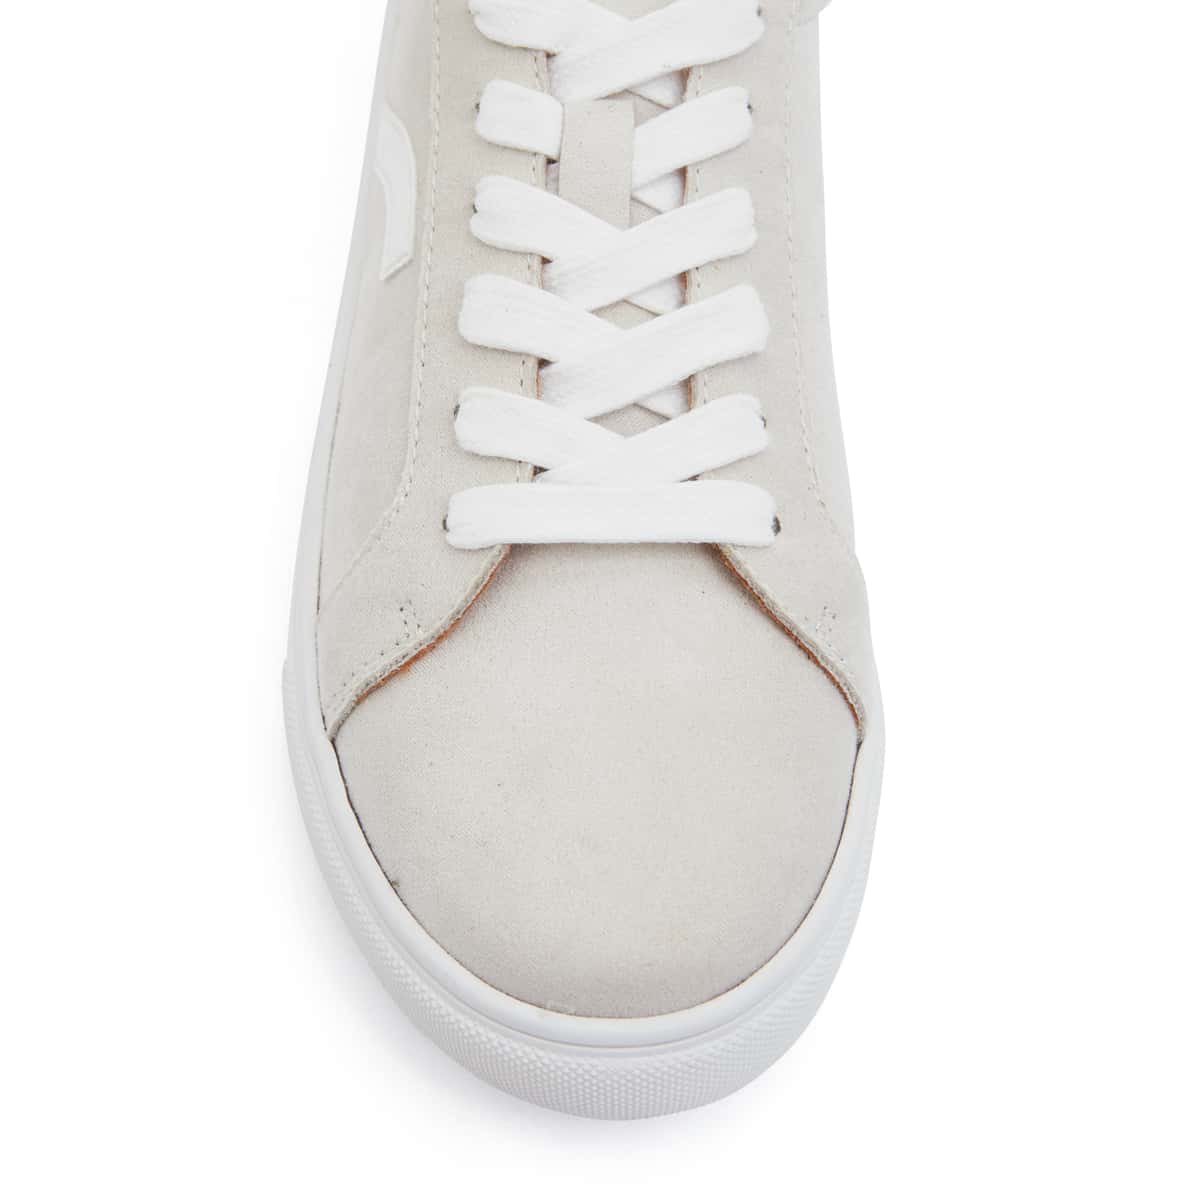 Swerve Sneaker in Taupe Micro Suede